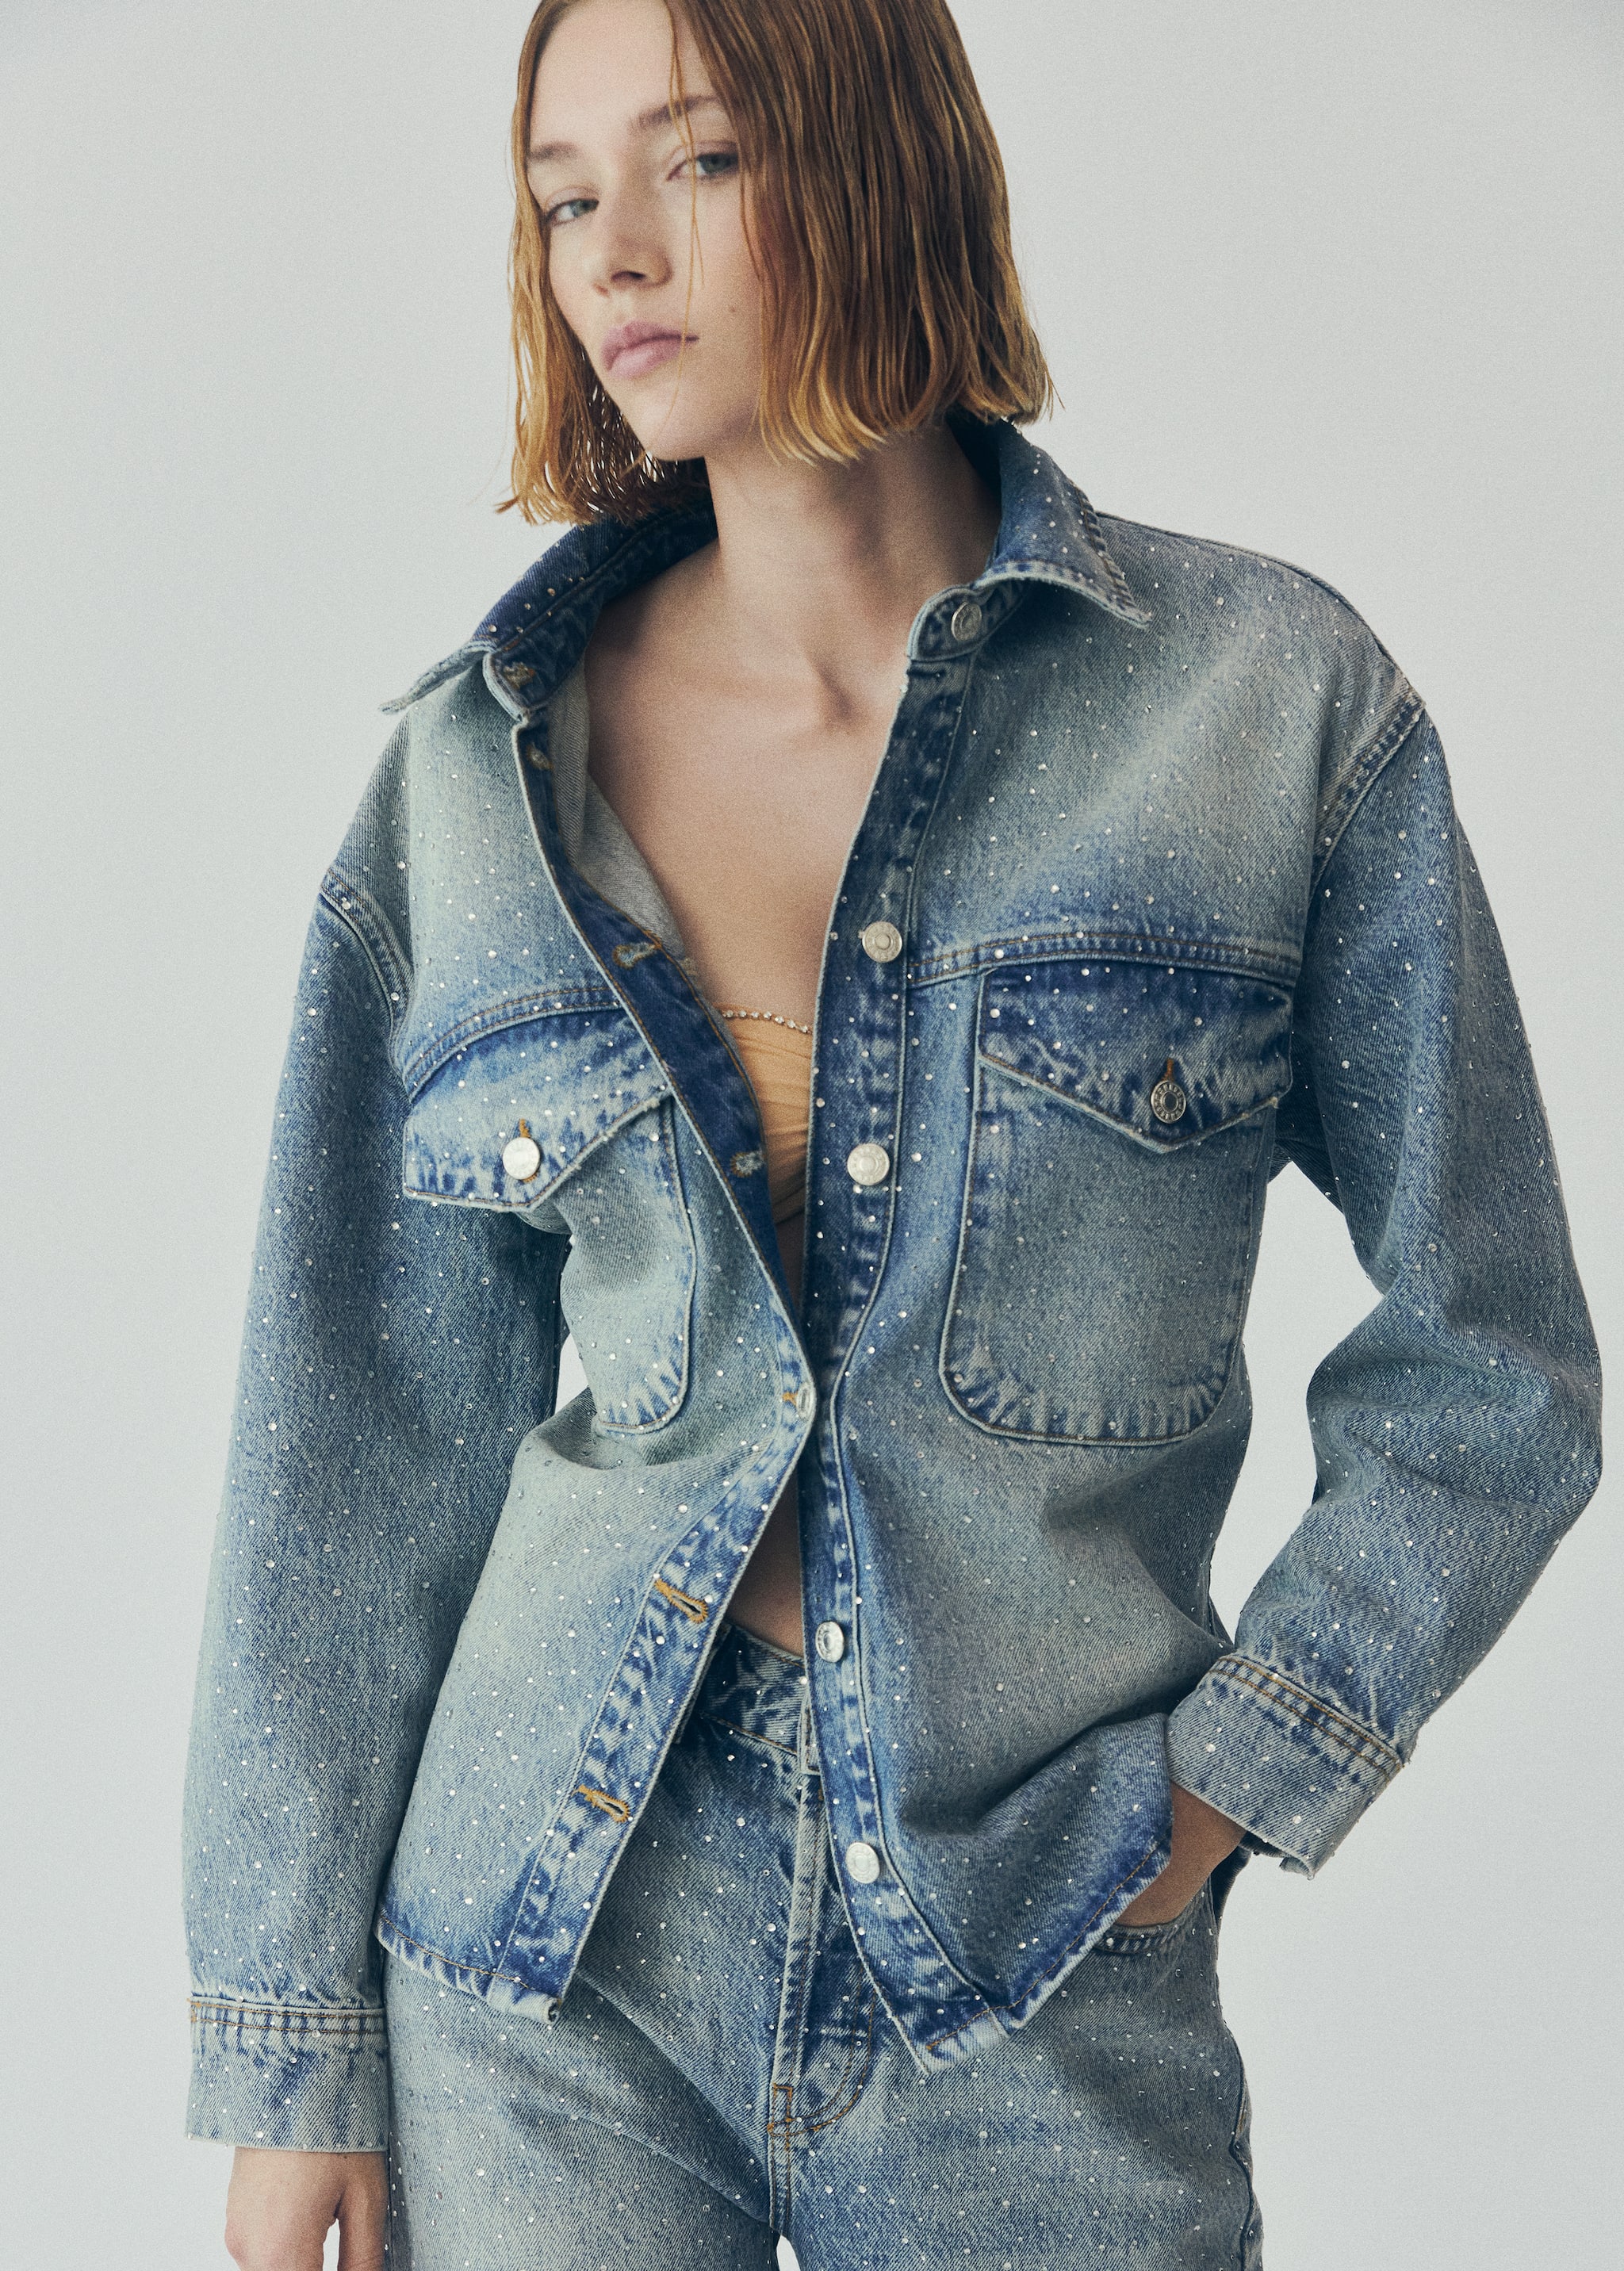 Denim jacket with rhinestones - Details of the article 7